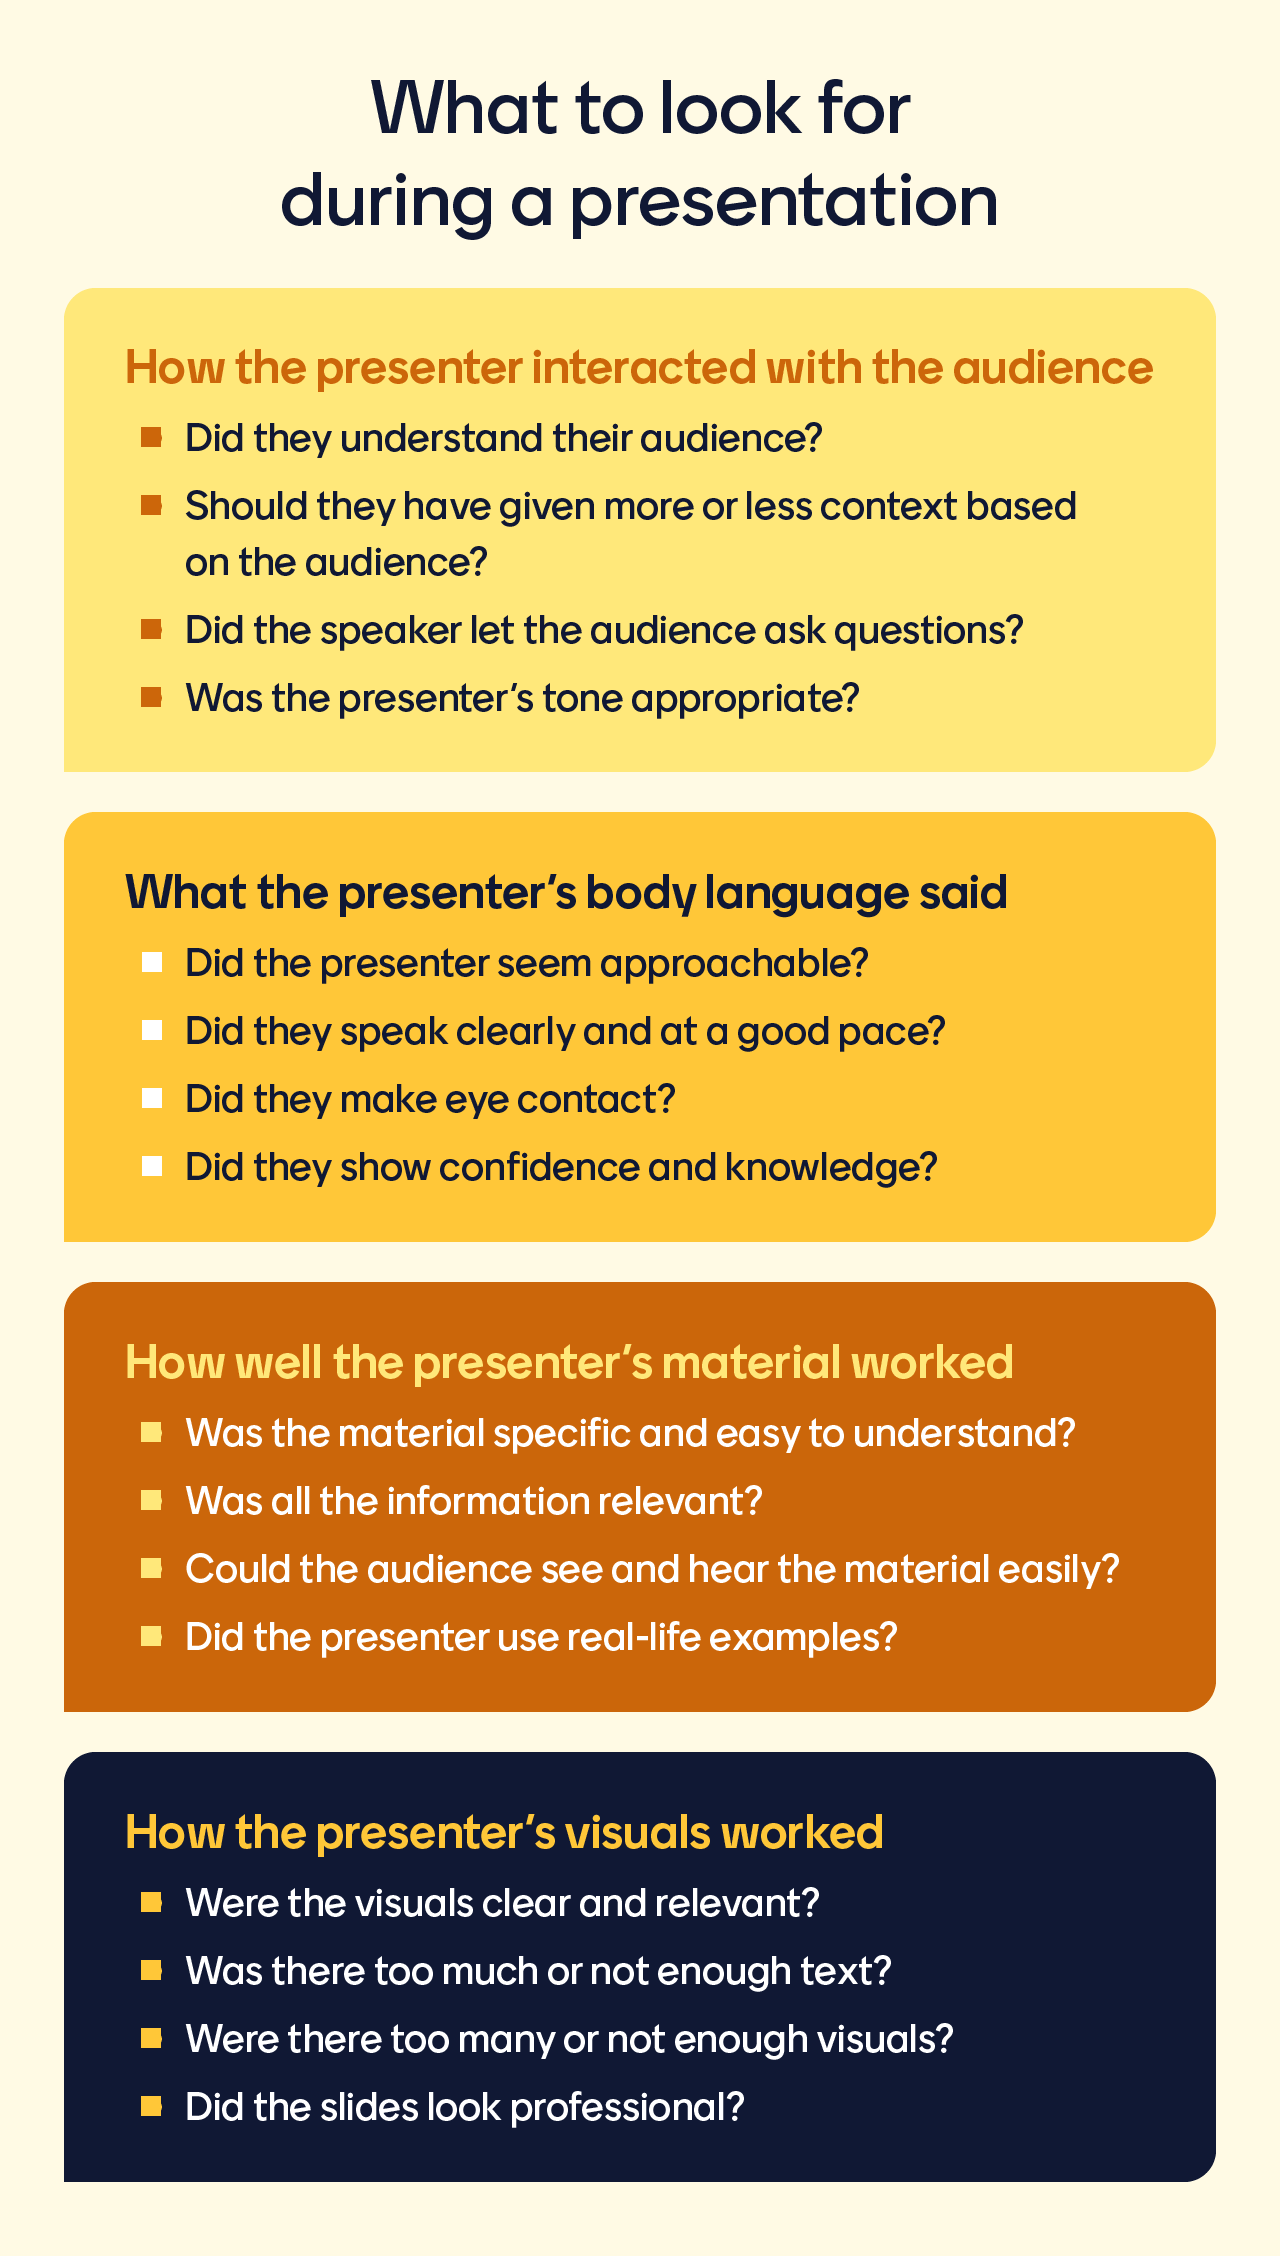 What to look for when evaluating a speaker during a presentation